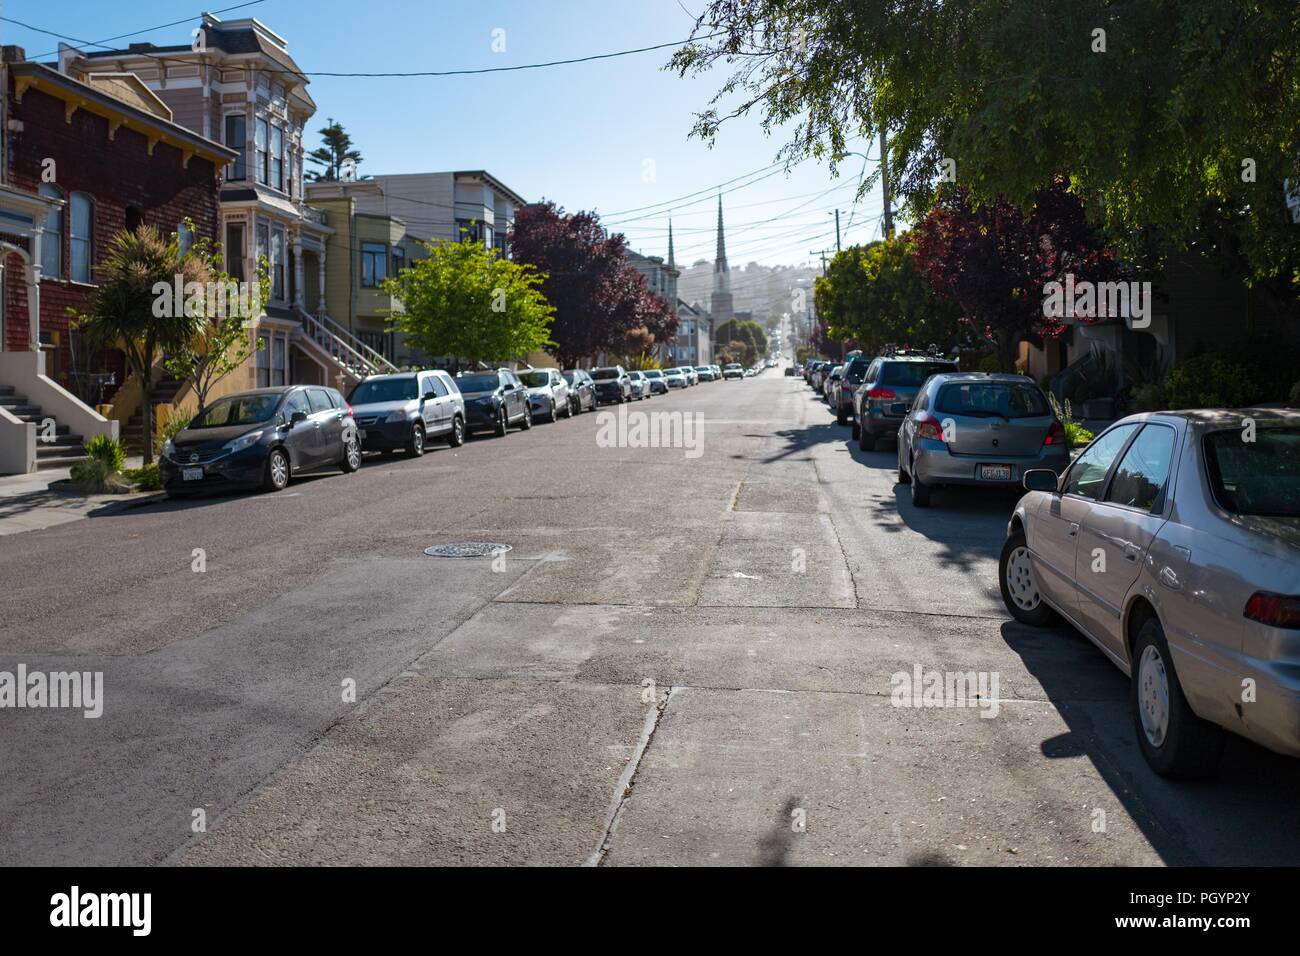 View down Valley Street in the Noe Valley neighborhood of San Francisco, California at sundown, with parked cars and Victorian style homes visible, with the spires of Saint Paul's Catholic Church visible in the distance, May 28, 2018. () Stock Photo